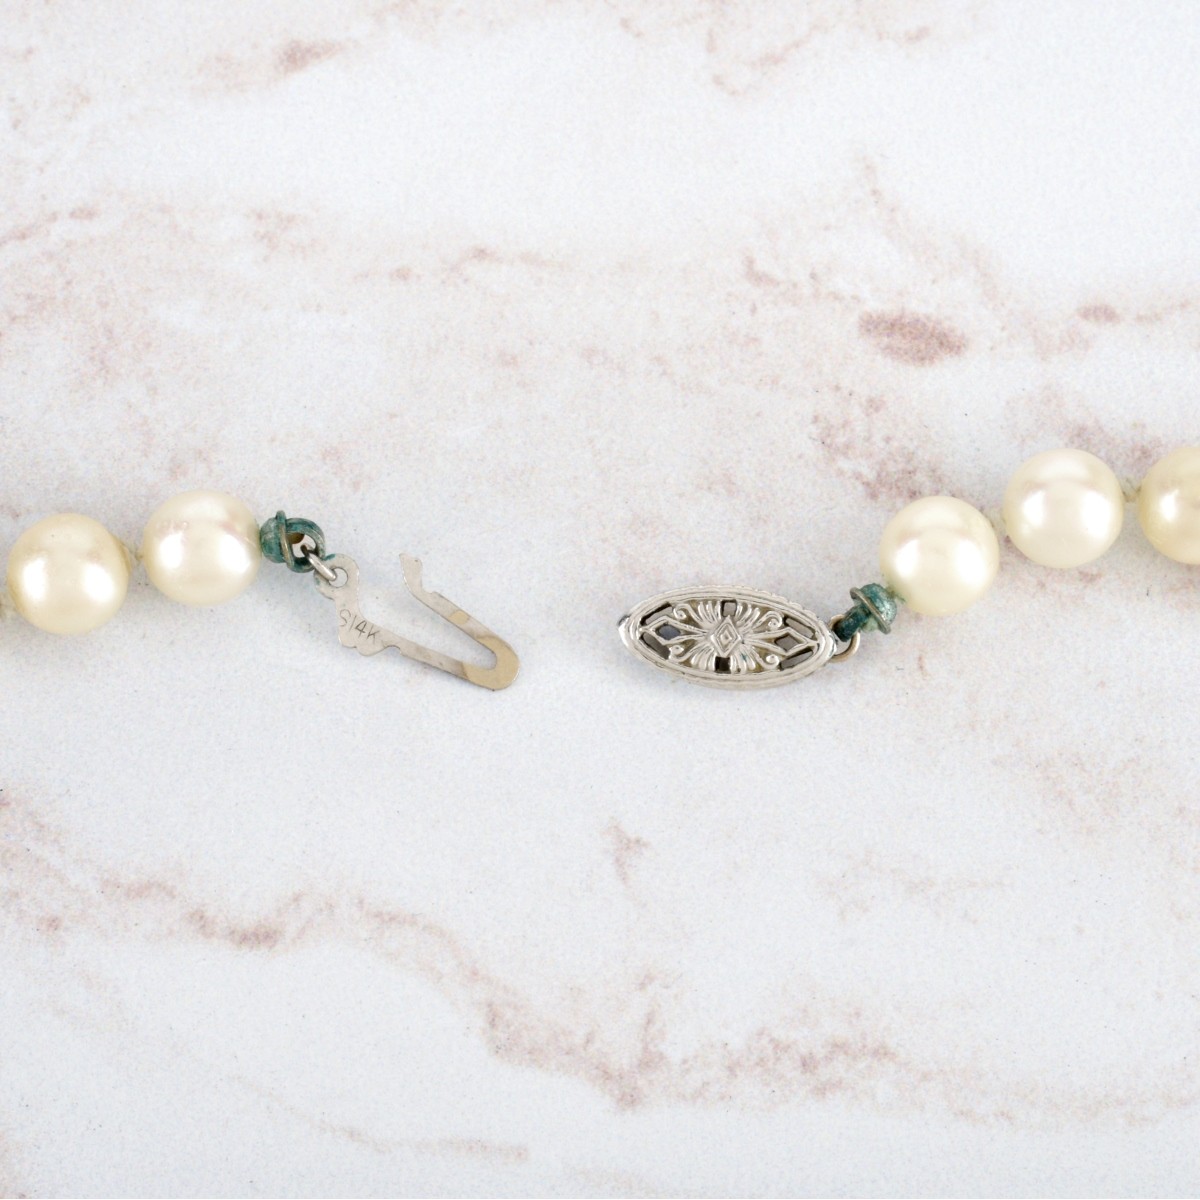 Pearl and 14K Necklace